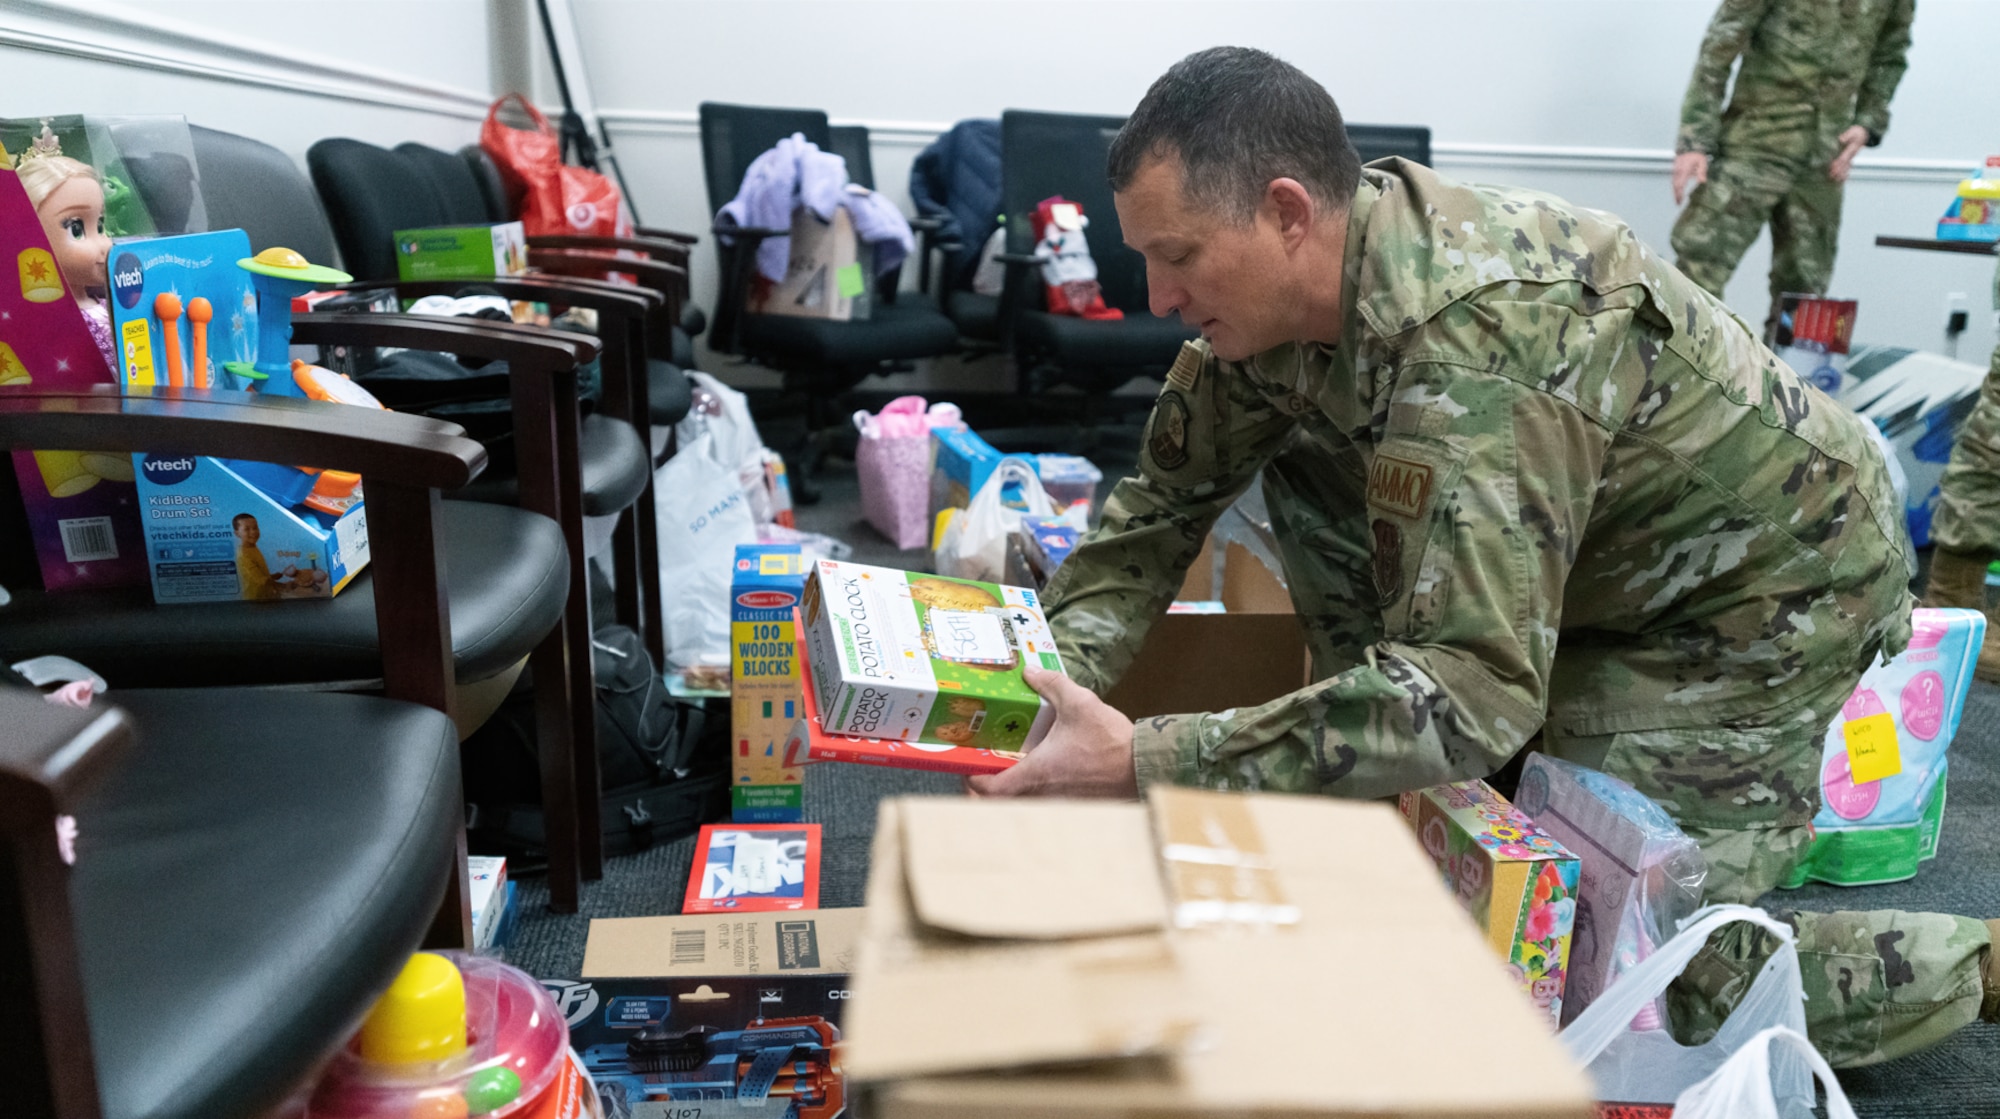 On December 14, 2022, Airmen from the 419th Fighter Wing, 388th Fighter Wing, 649th Munitions Squadron, 75th Air Base Wing, and other mission partners volunteered their time to gather and deliver hundreds of gifts to the foster care families of northern Utah.